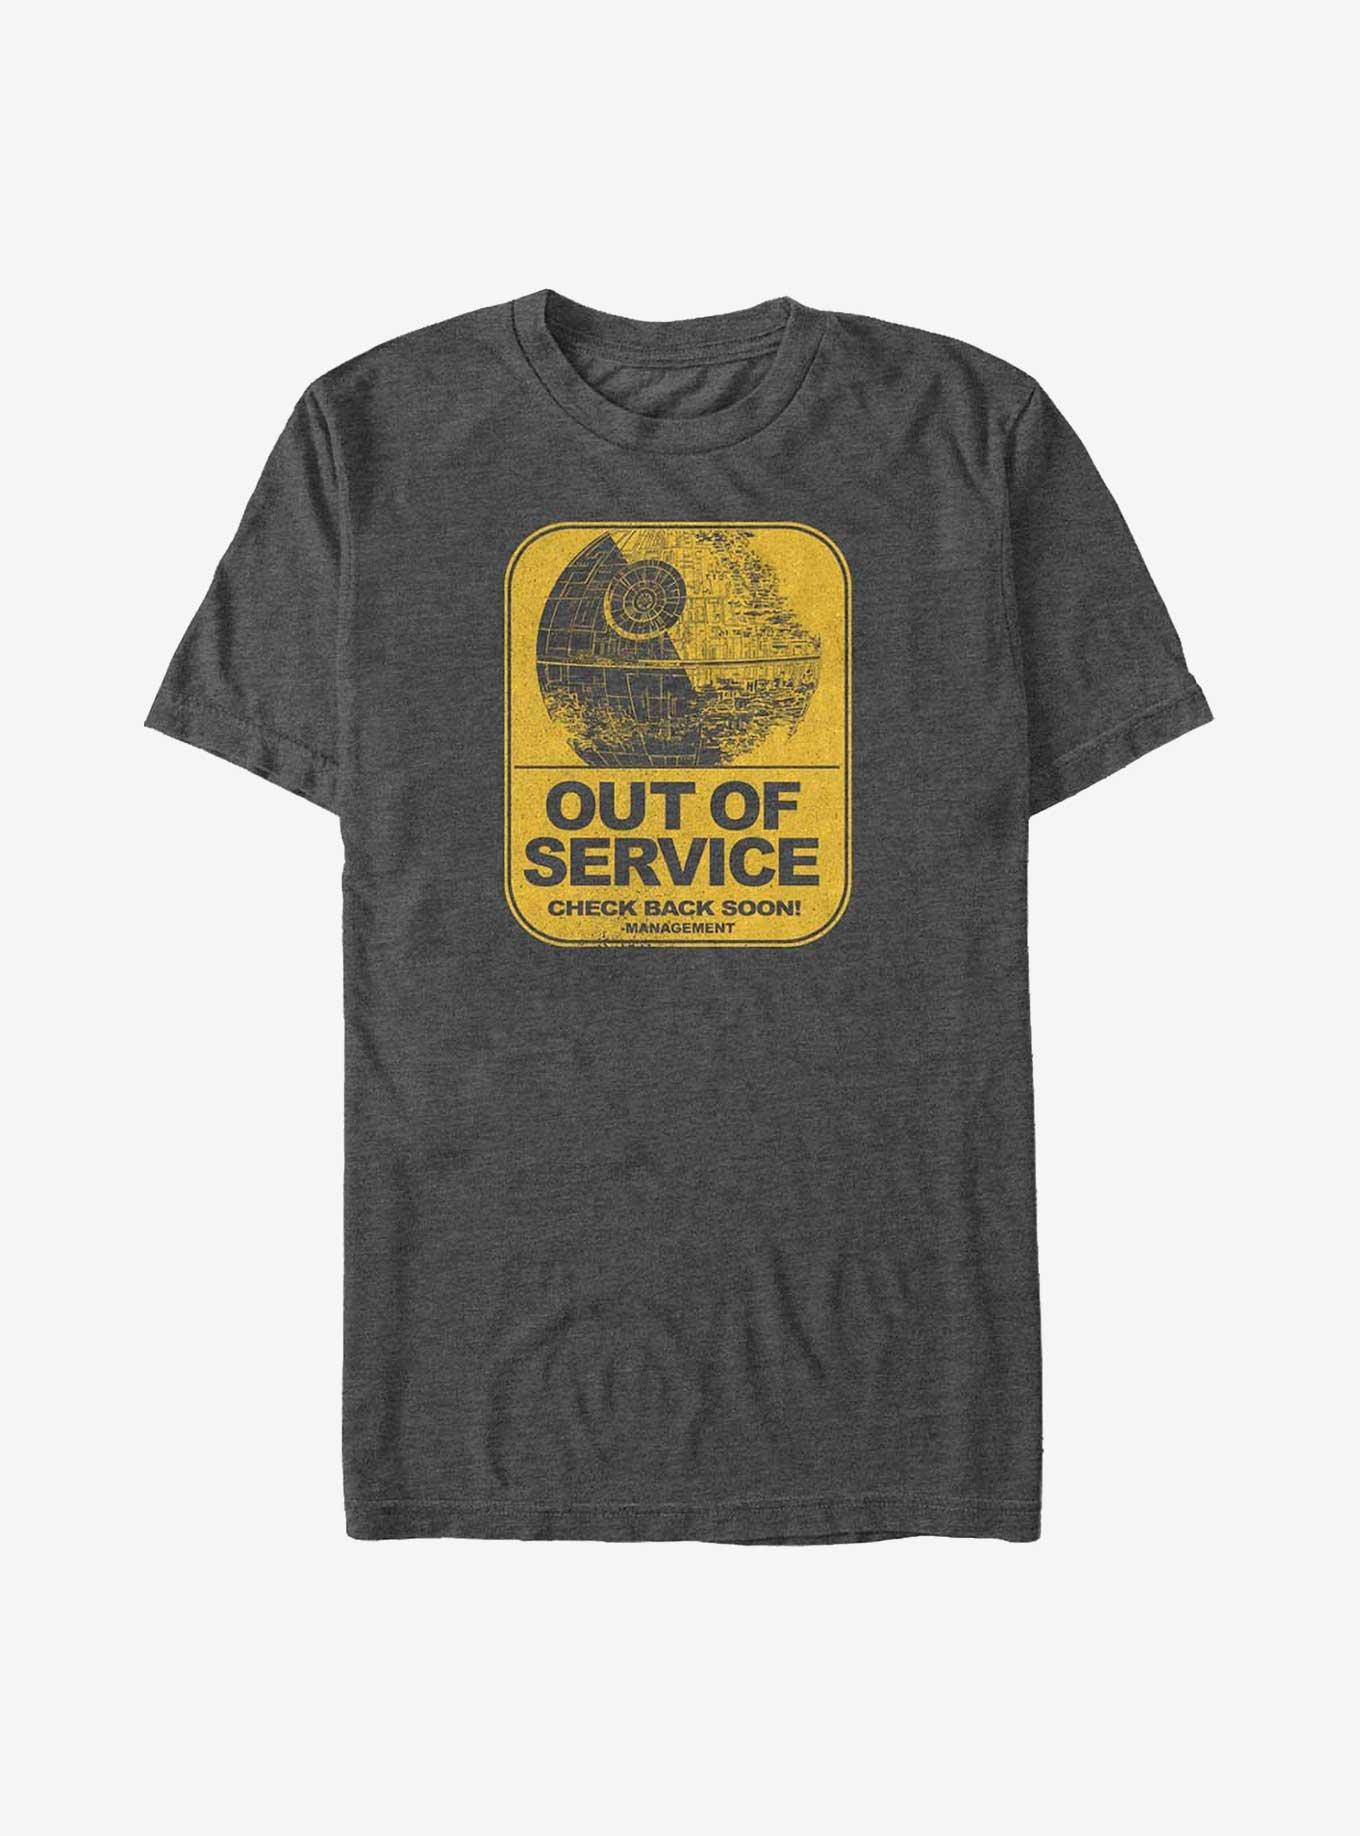 Star Wars Out Of Service Big & Tall T-Shirt, CHAR HTR, hi-res